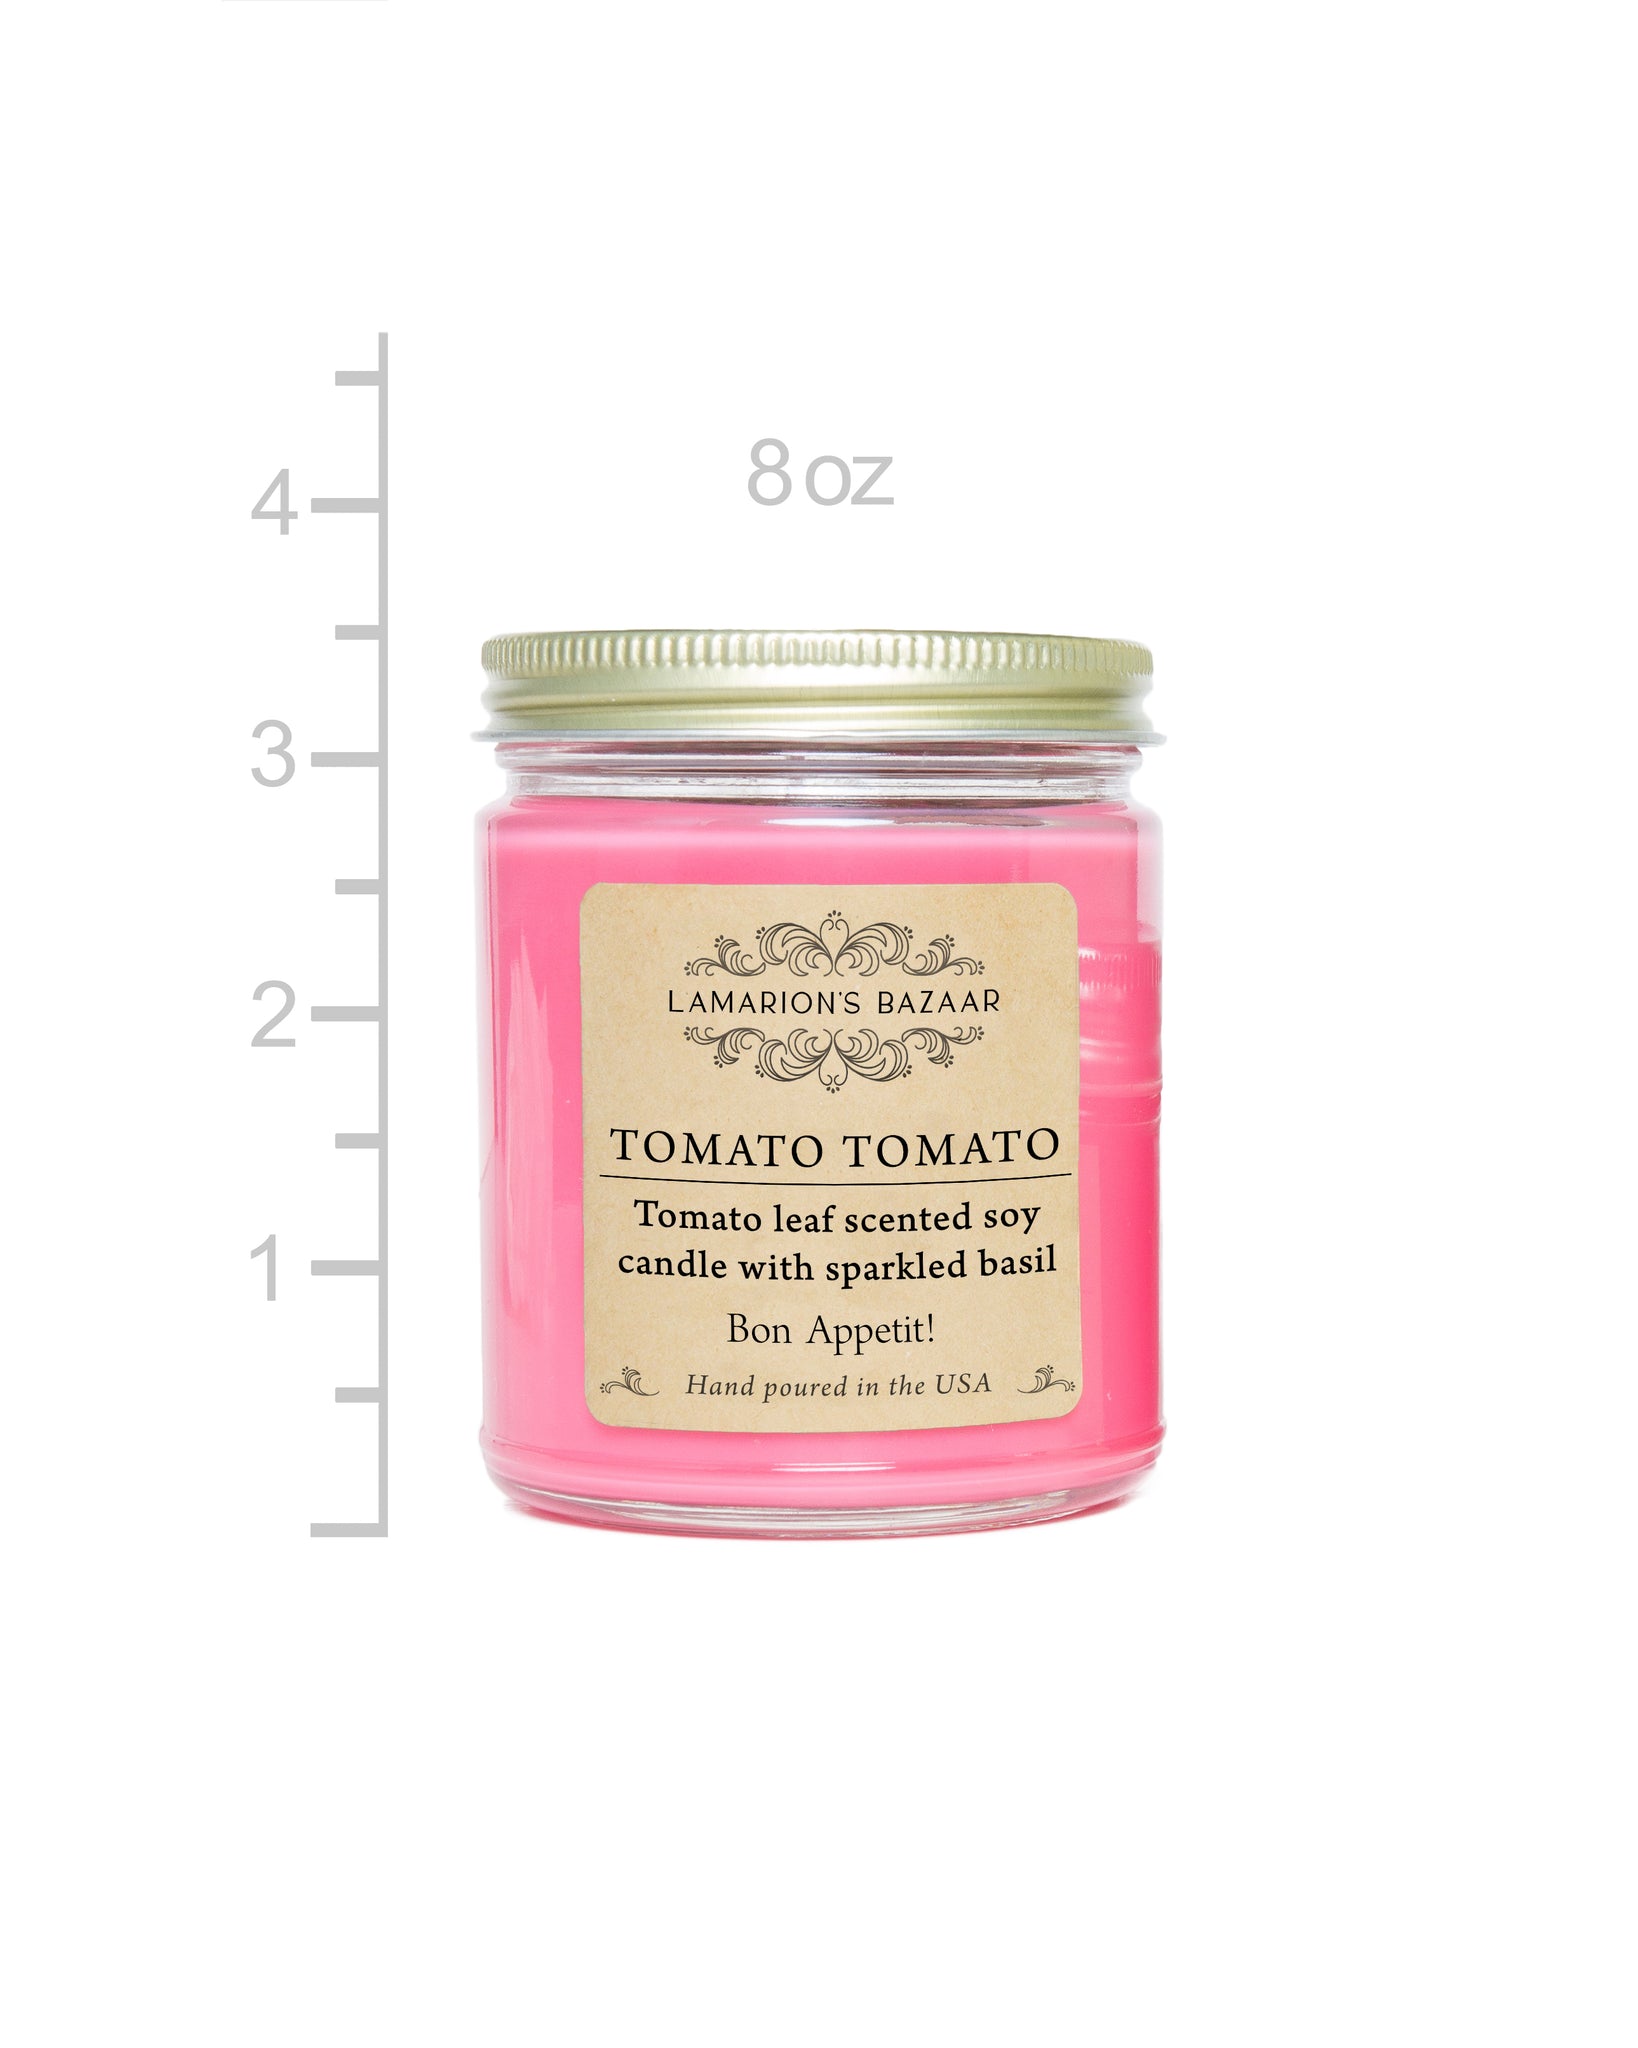 TOMATO TOMATO "Tomato Leaf Scented - 100% Natural Soy - Odor clean - Kitchen Candle